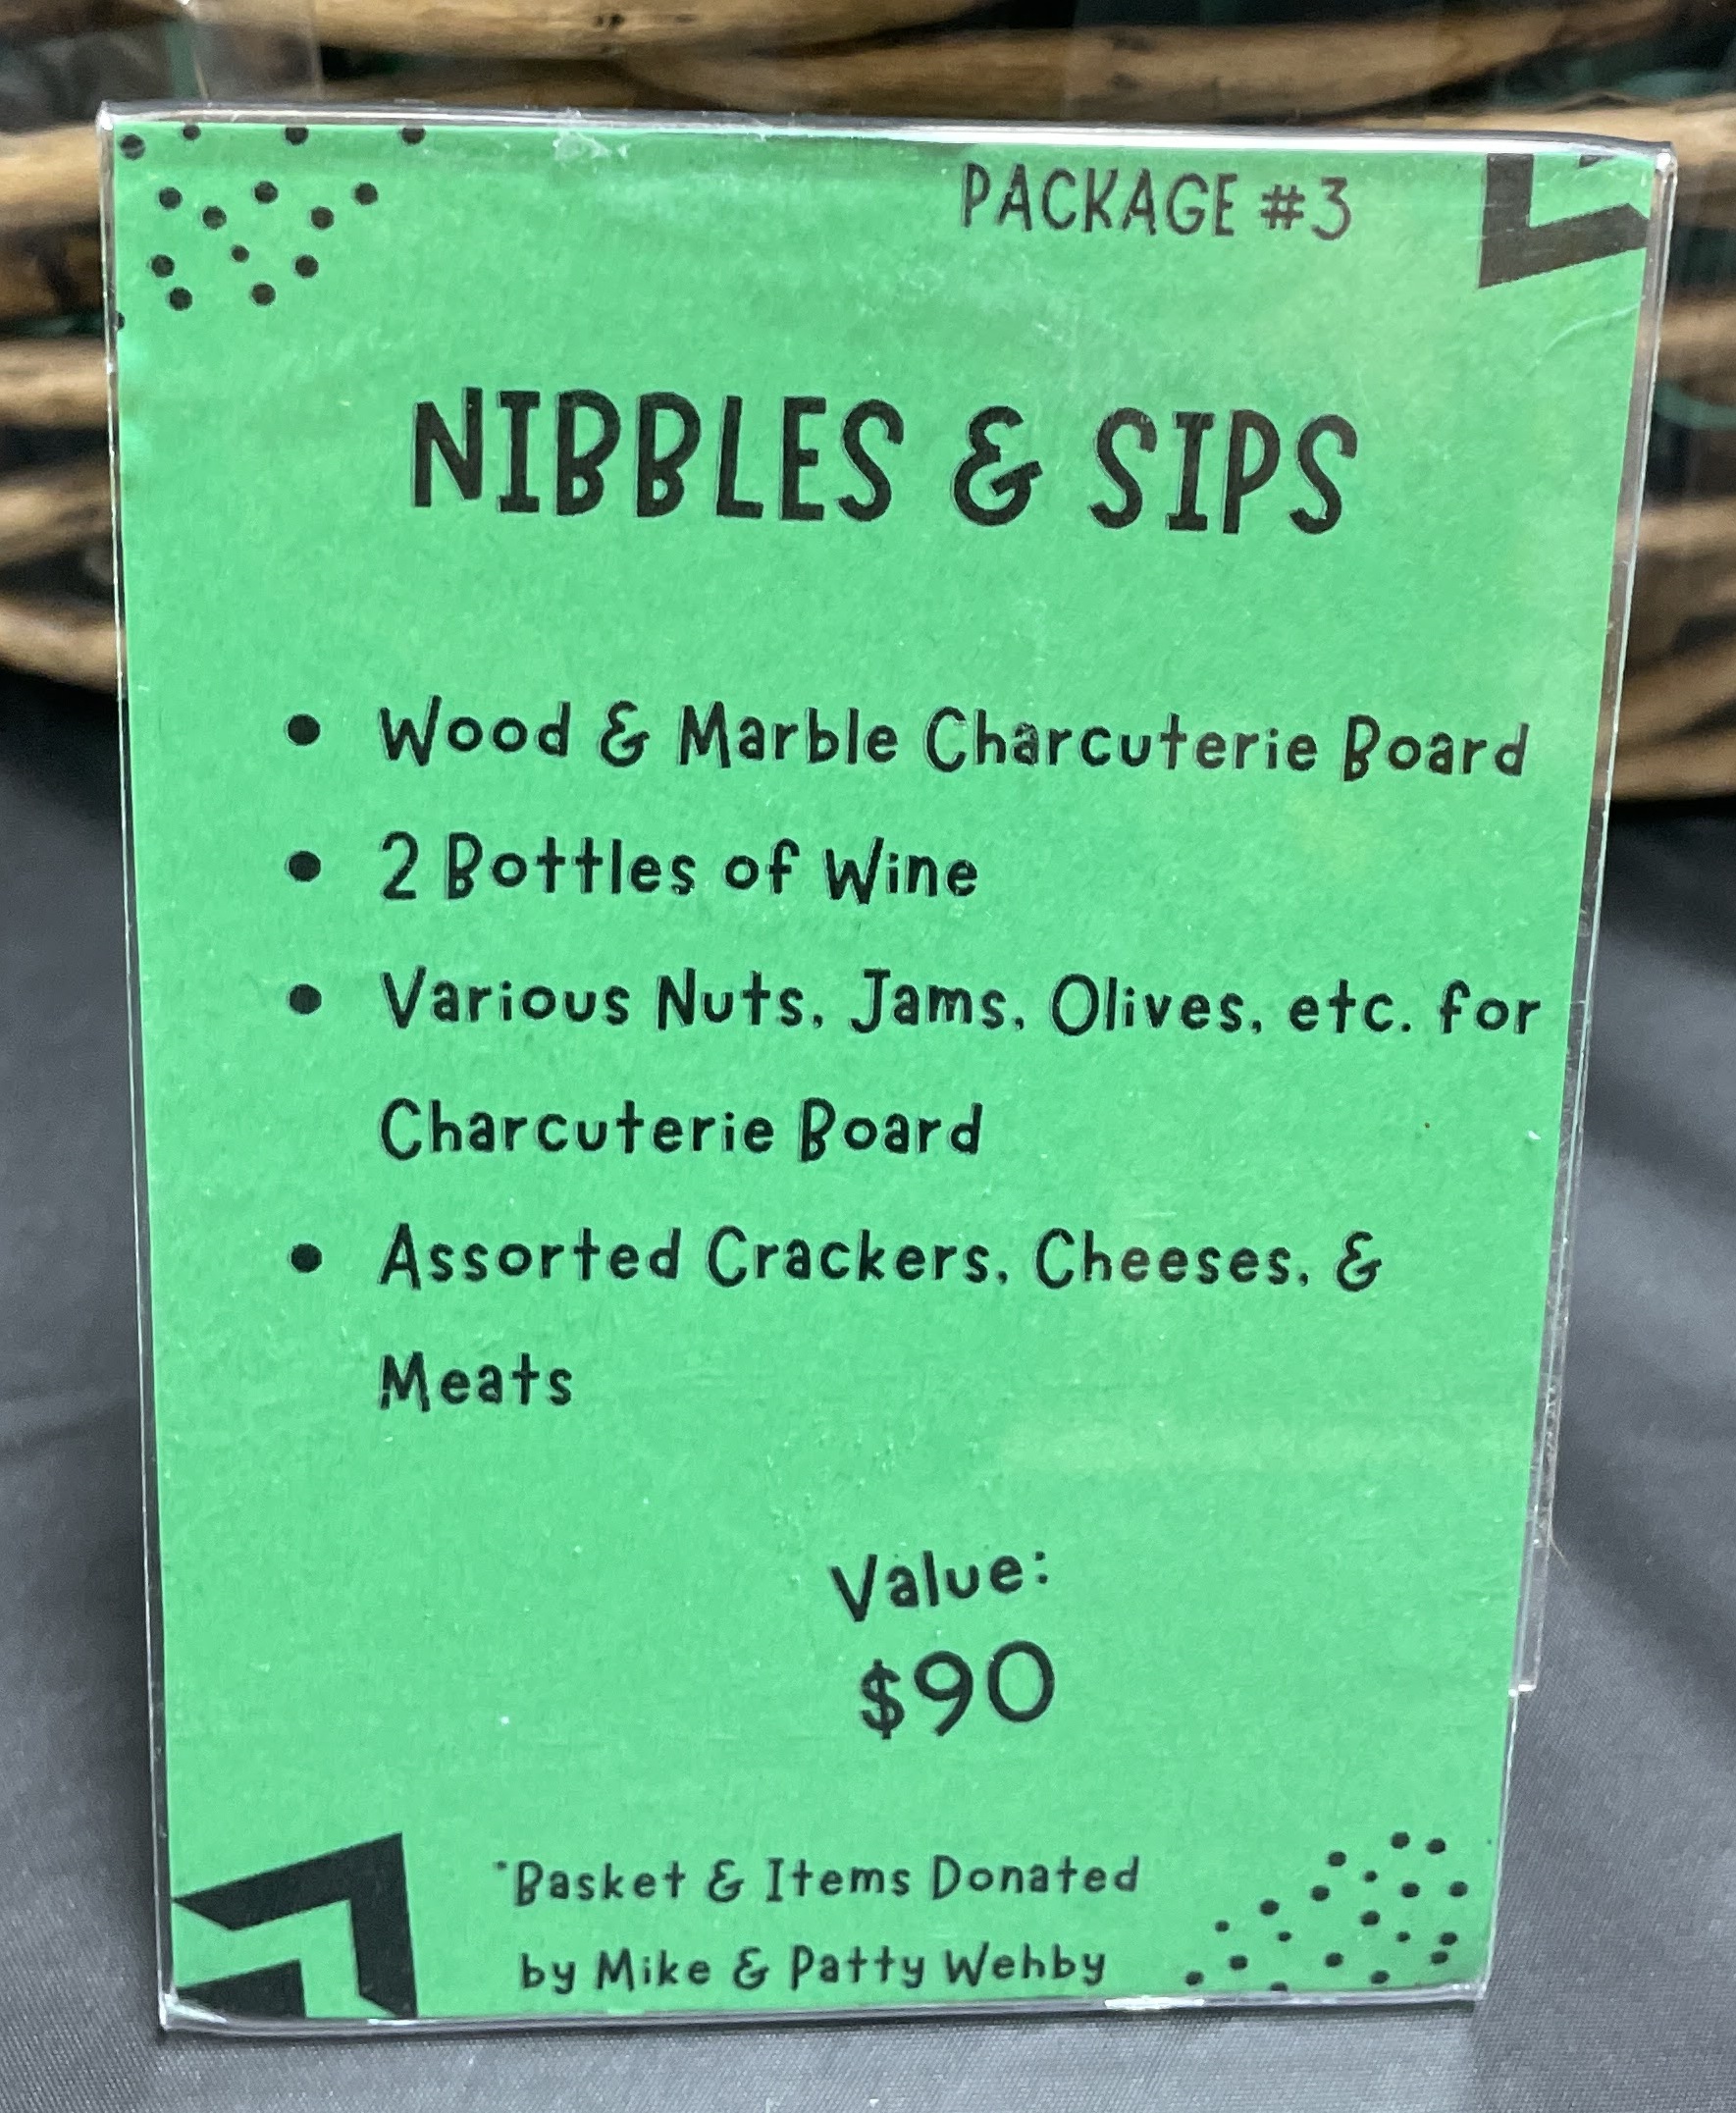 Auction Item #3: Nibbles and Sips